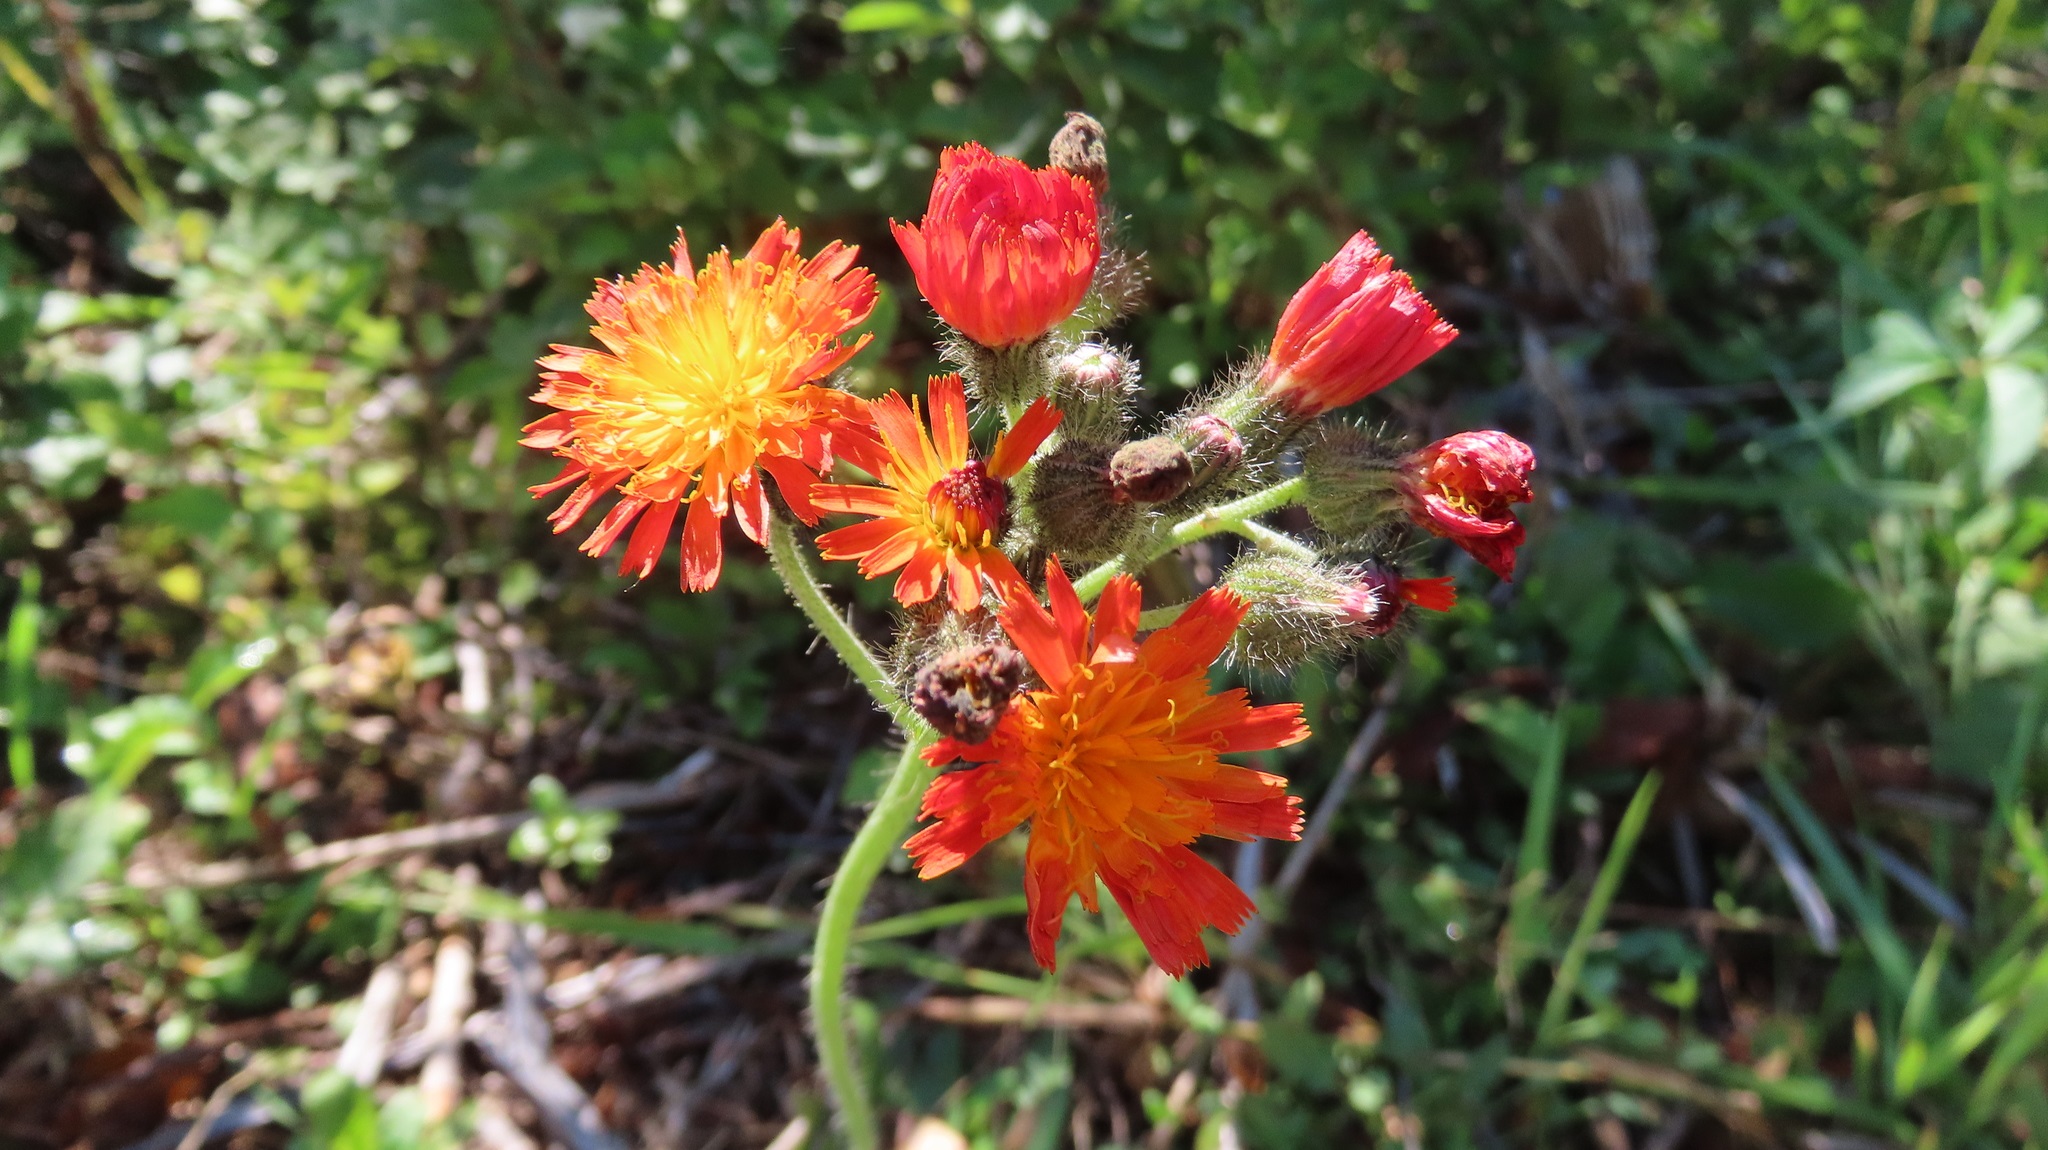 A close-up image of a cluster of orange hawkweed flowers in full bloom.